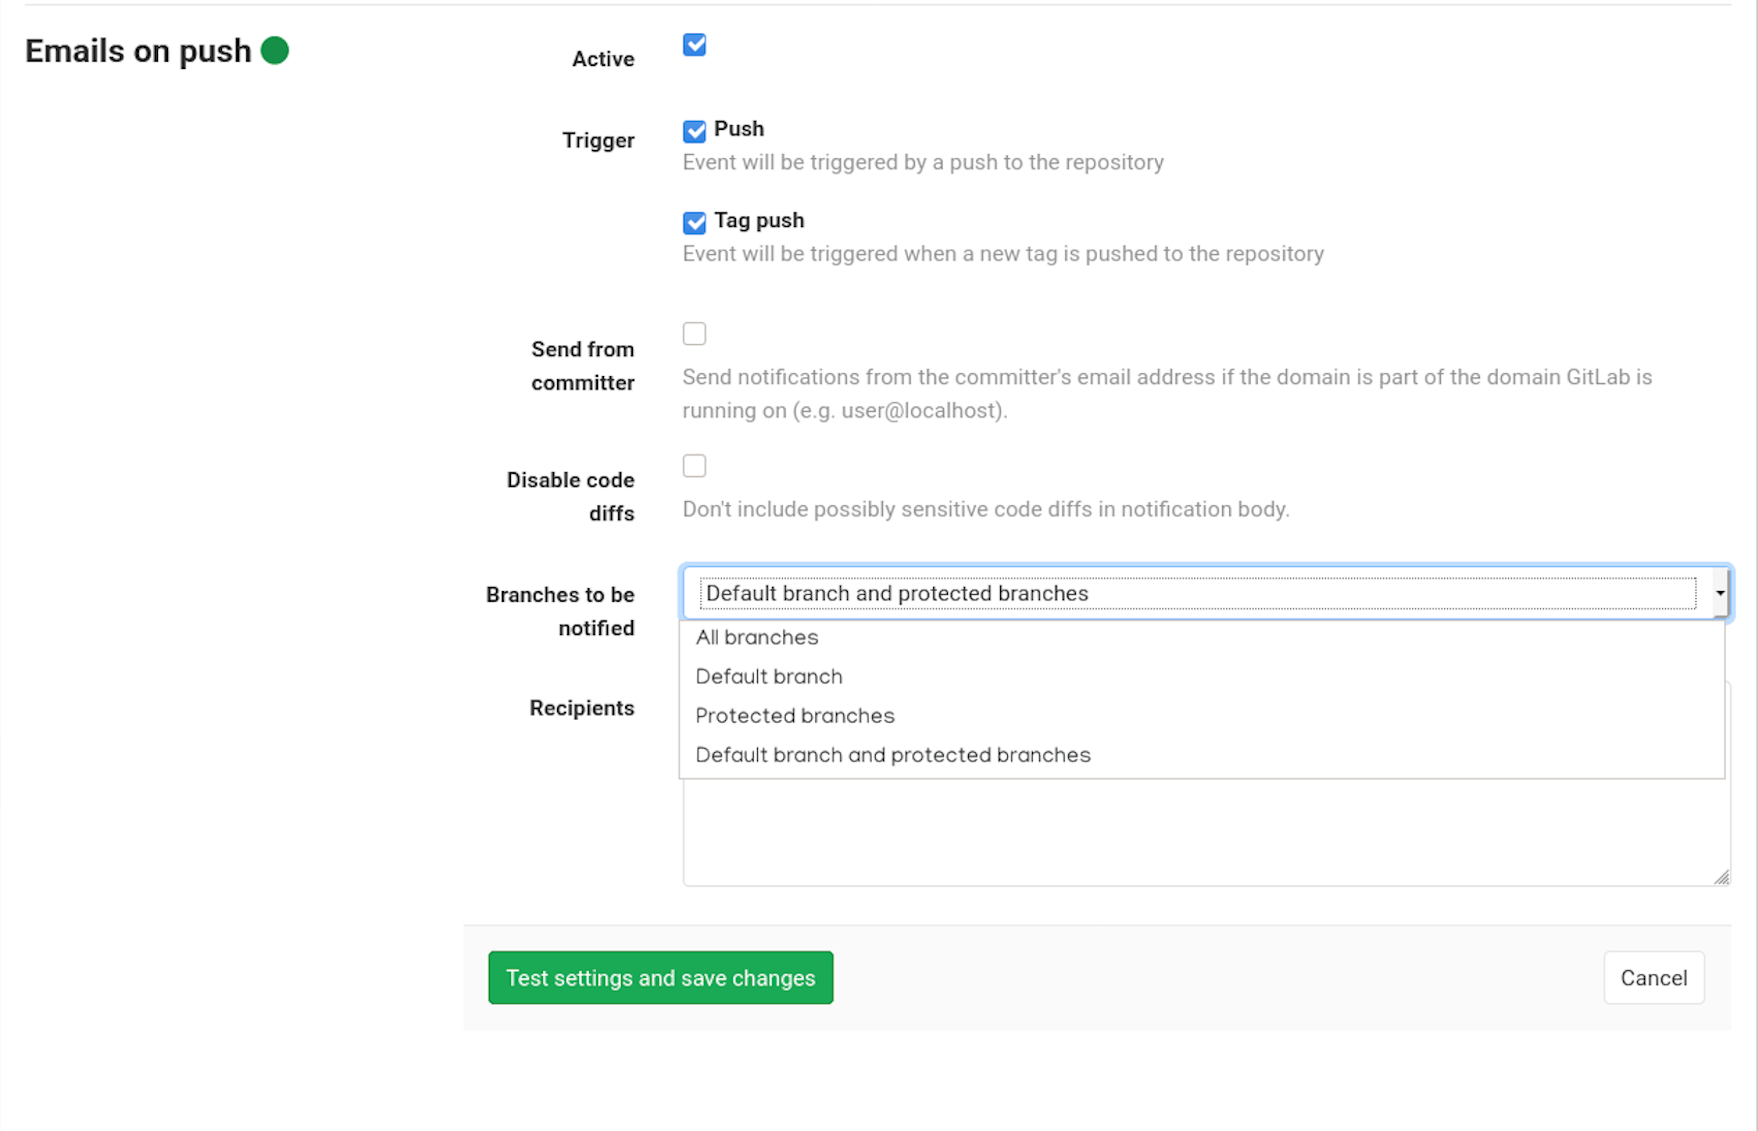 Email on push service settings